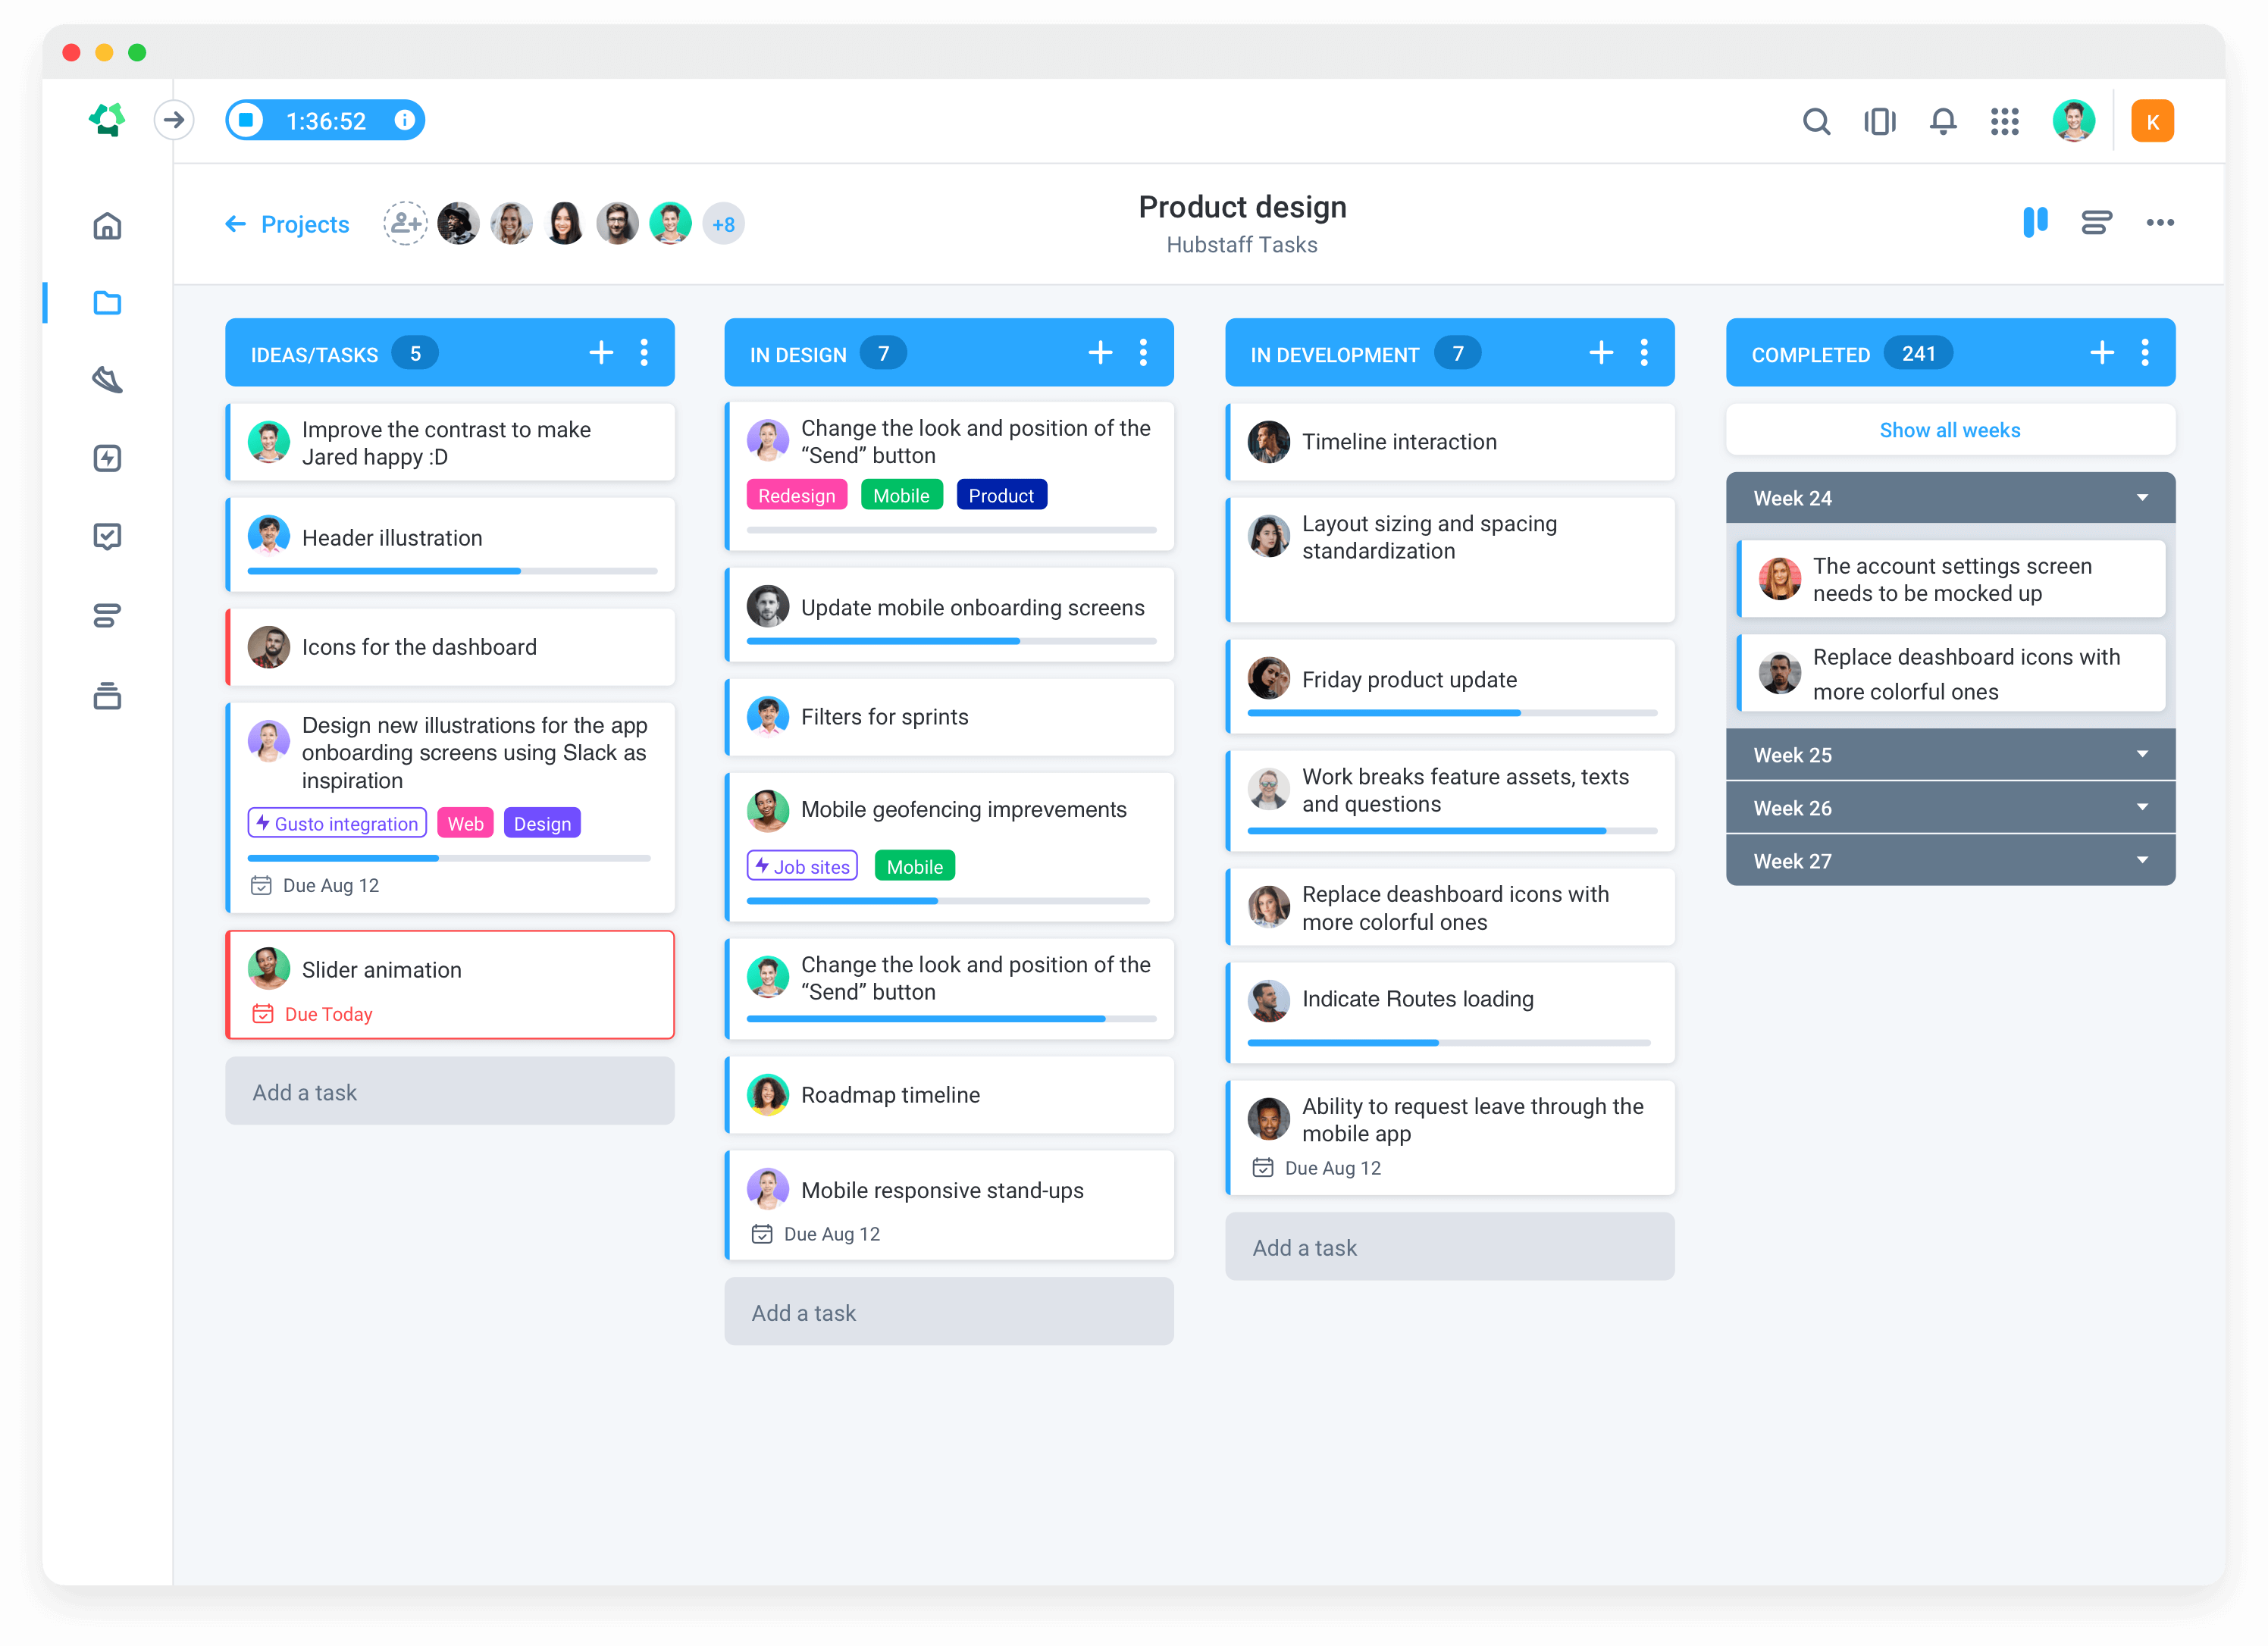 With Hubstaff Tasks, you’ll have access to powerful Kanban-style boards.